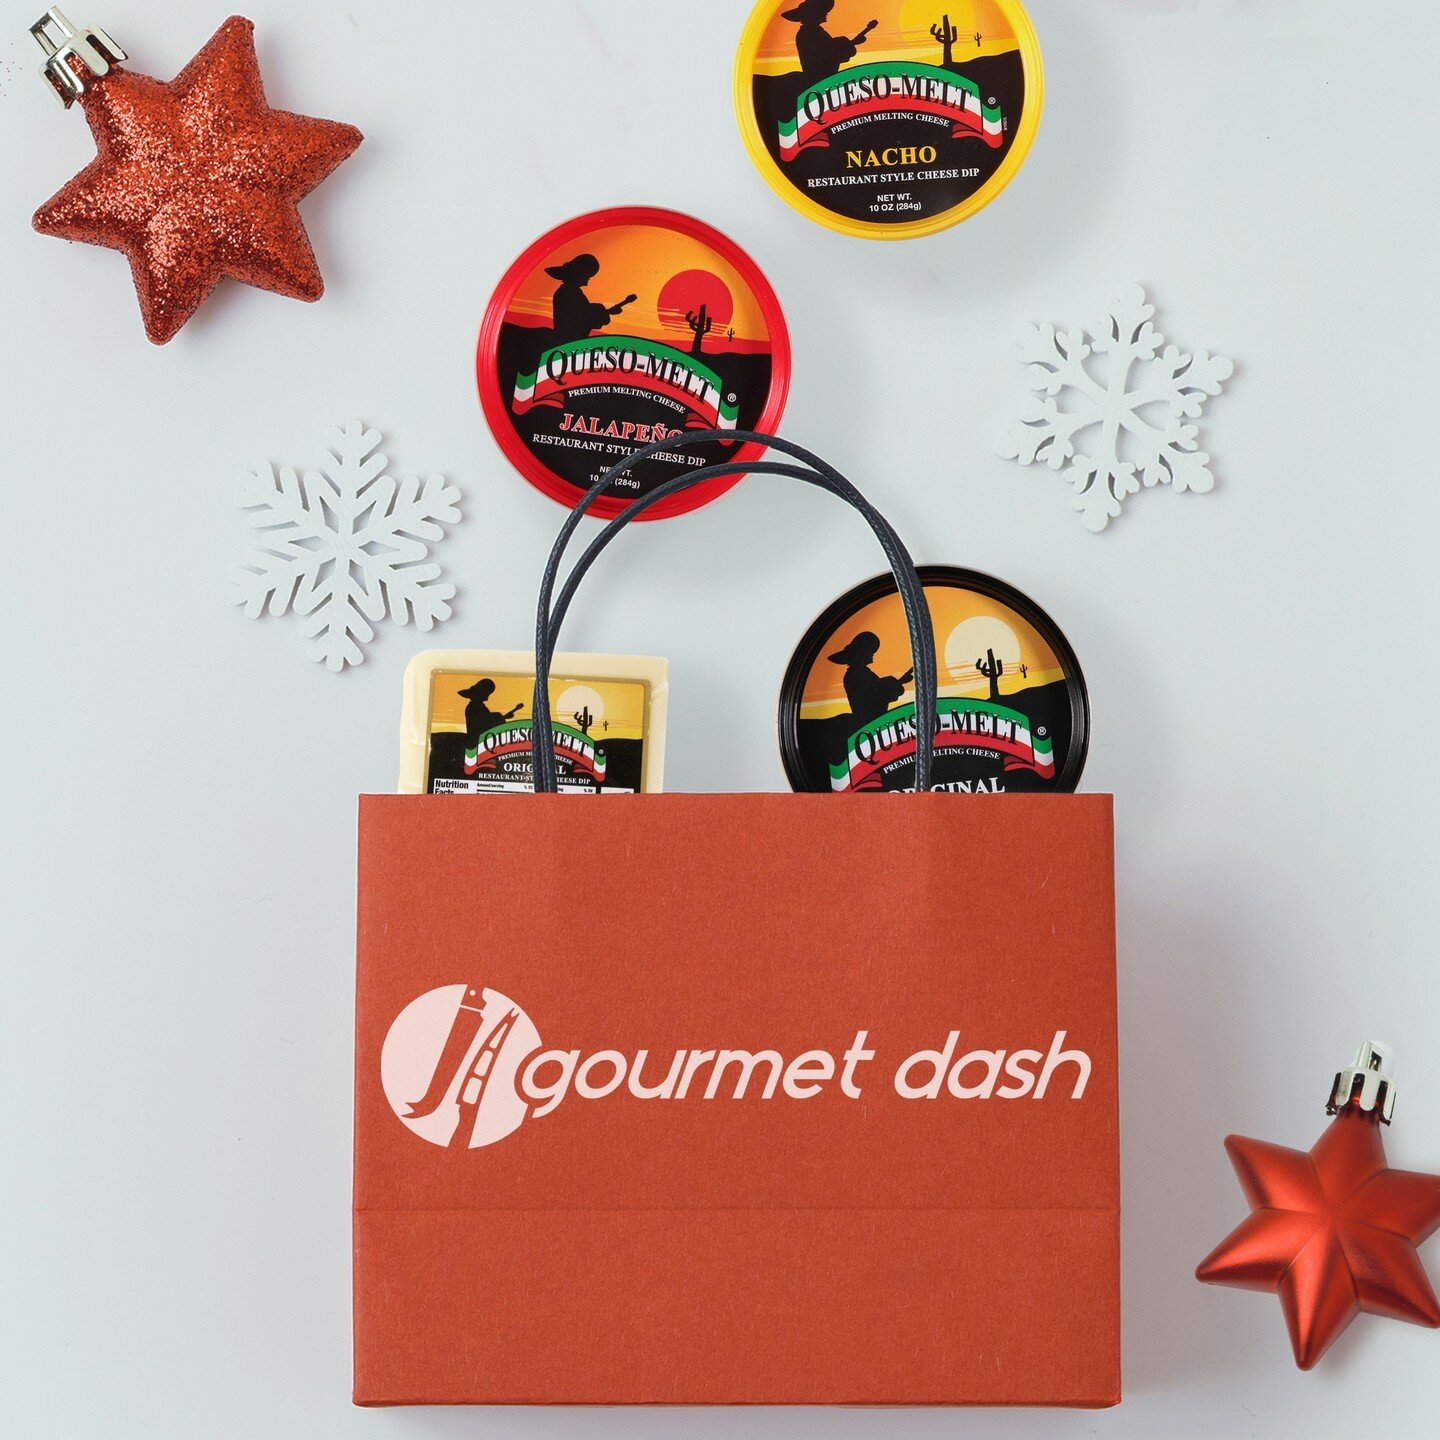 Looking to add some Queso magic to your holiday season? Order conveniently online at GourmetDash.com for speedy delivery!

Order now with the link in our bio!

.
.
.
.
.
.
.
.
.
#onlineshopping #onlineorder #onlineordering #chipsandqueso #chipsandque